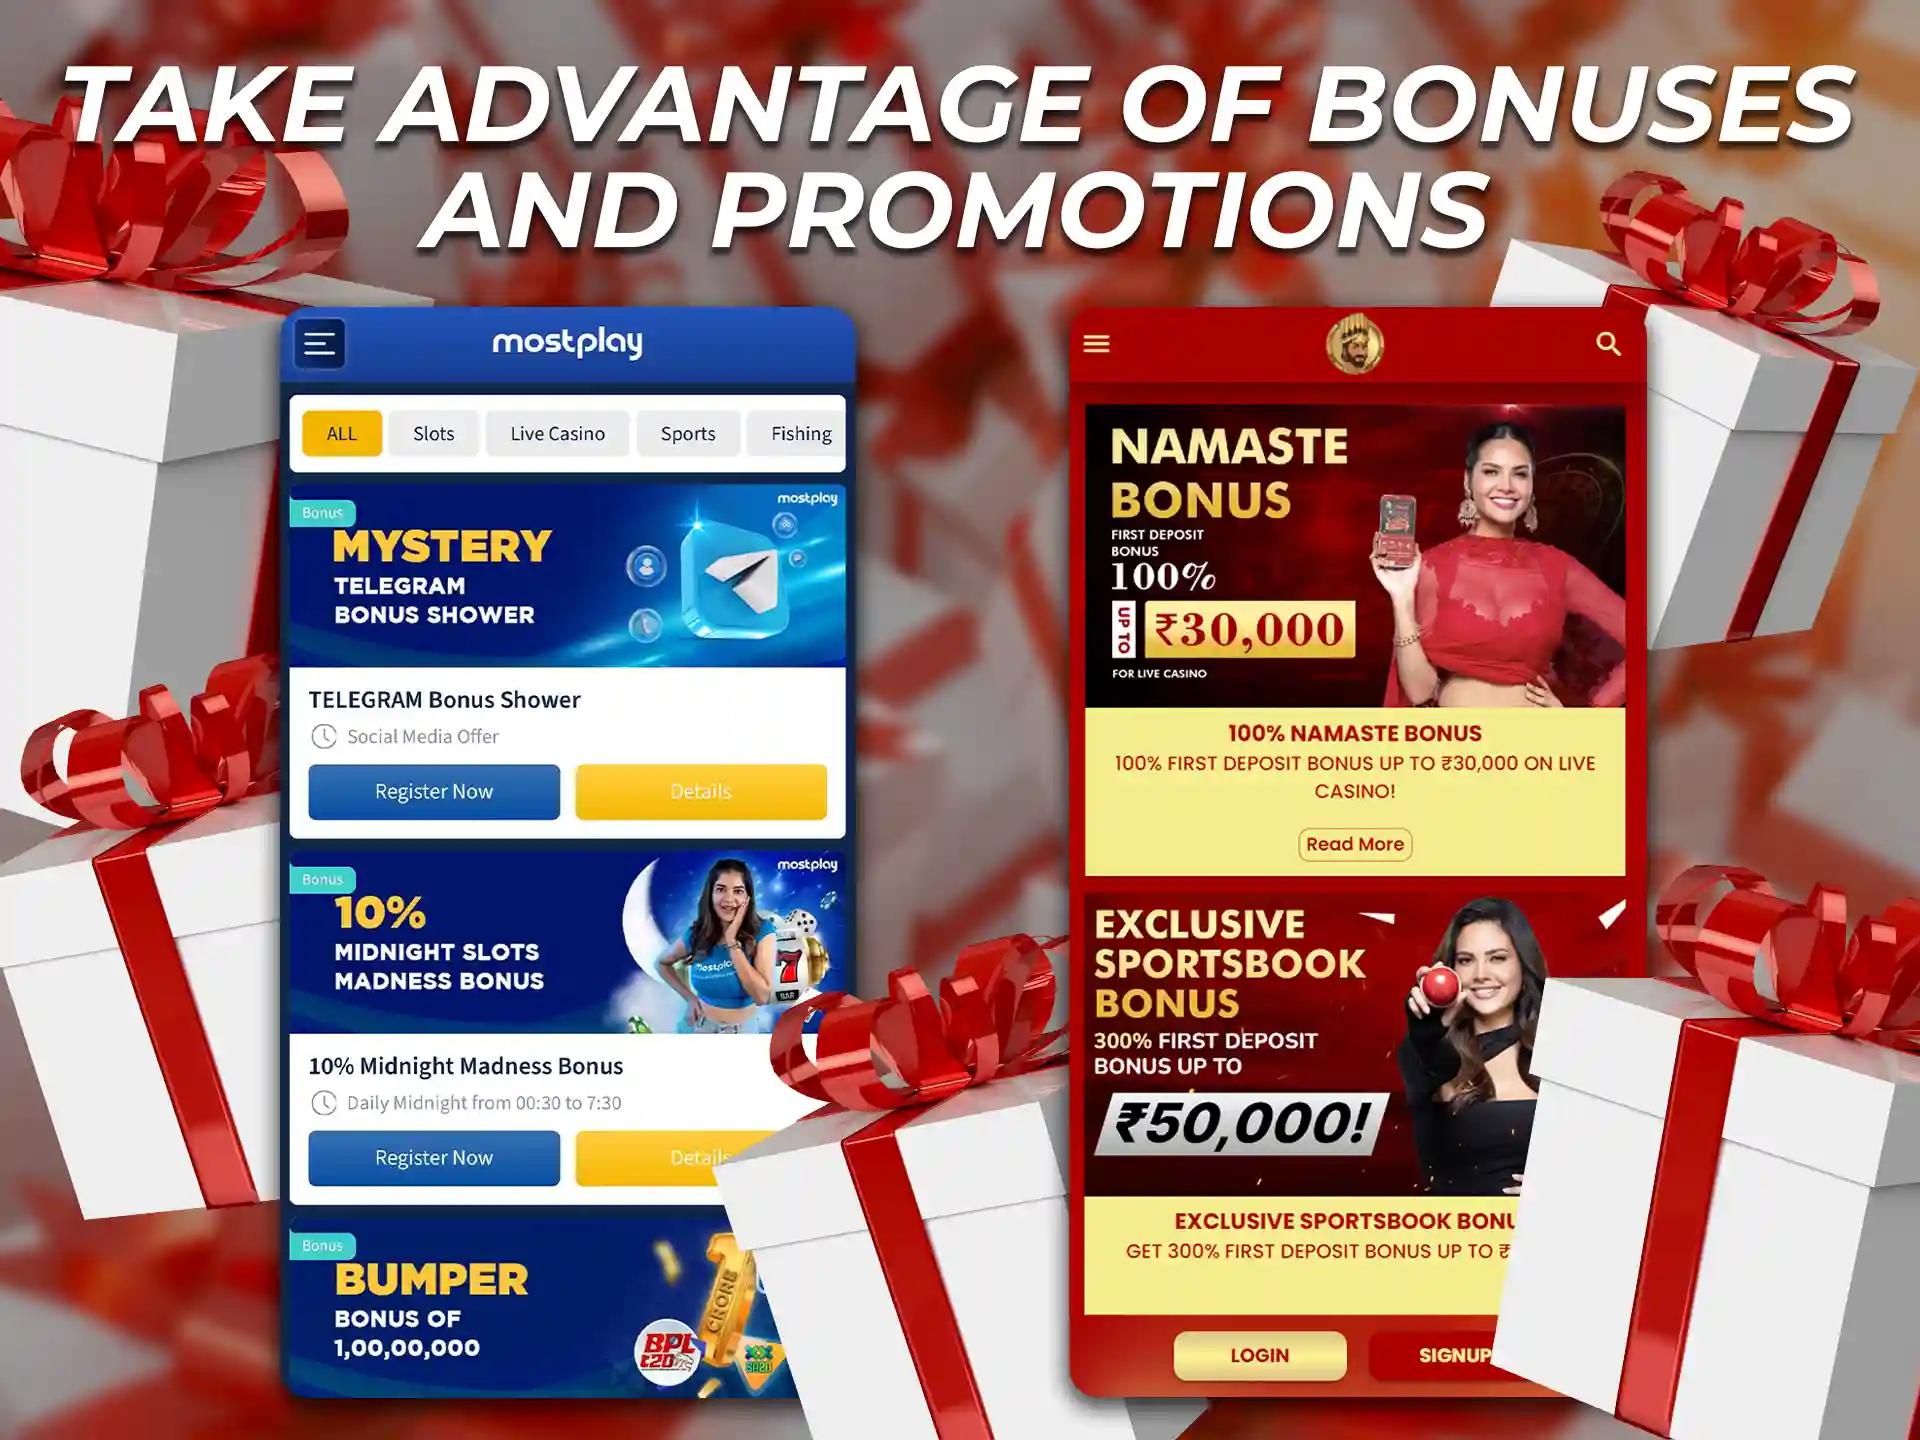 Take advantage of bonuses and promotions to increase your chances of winning.